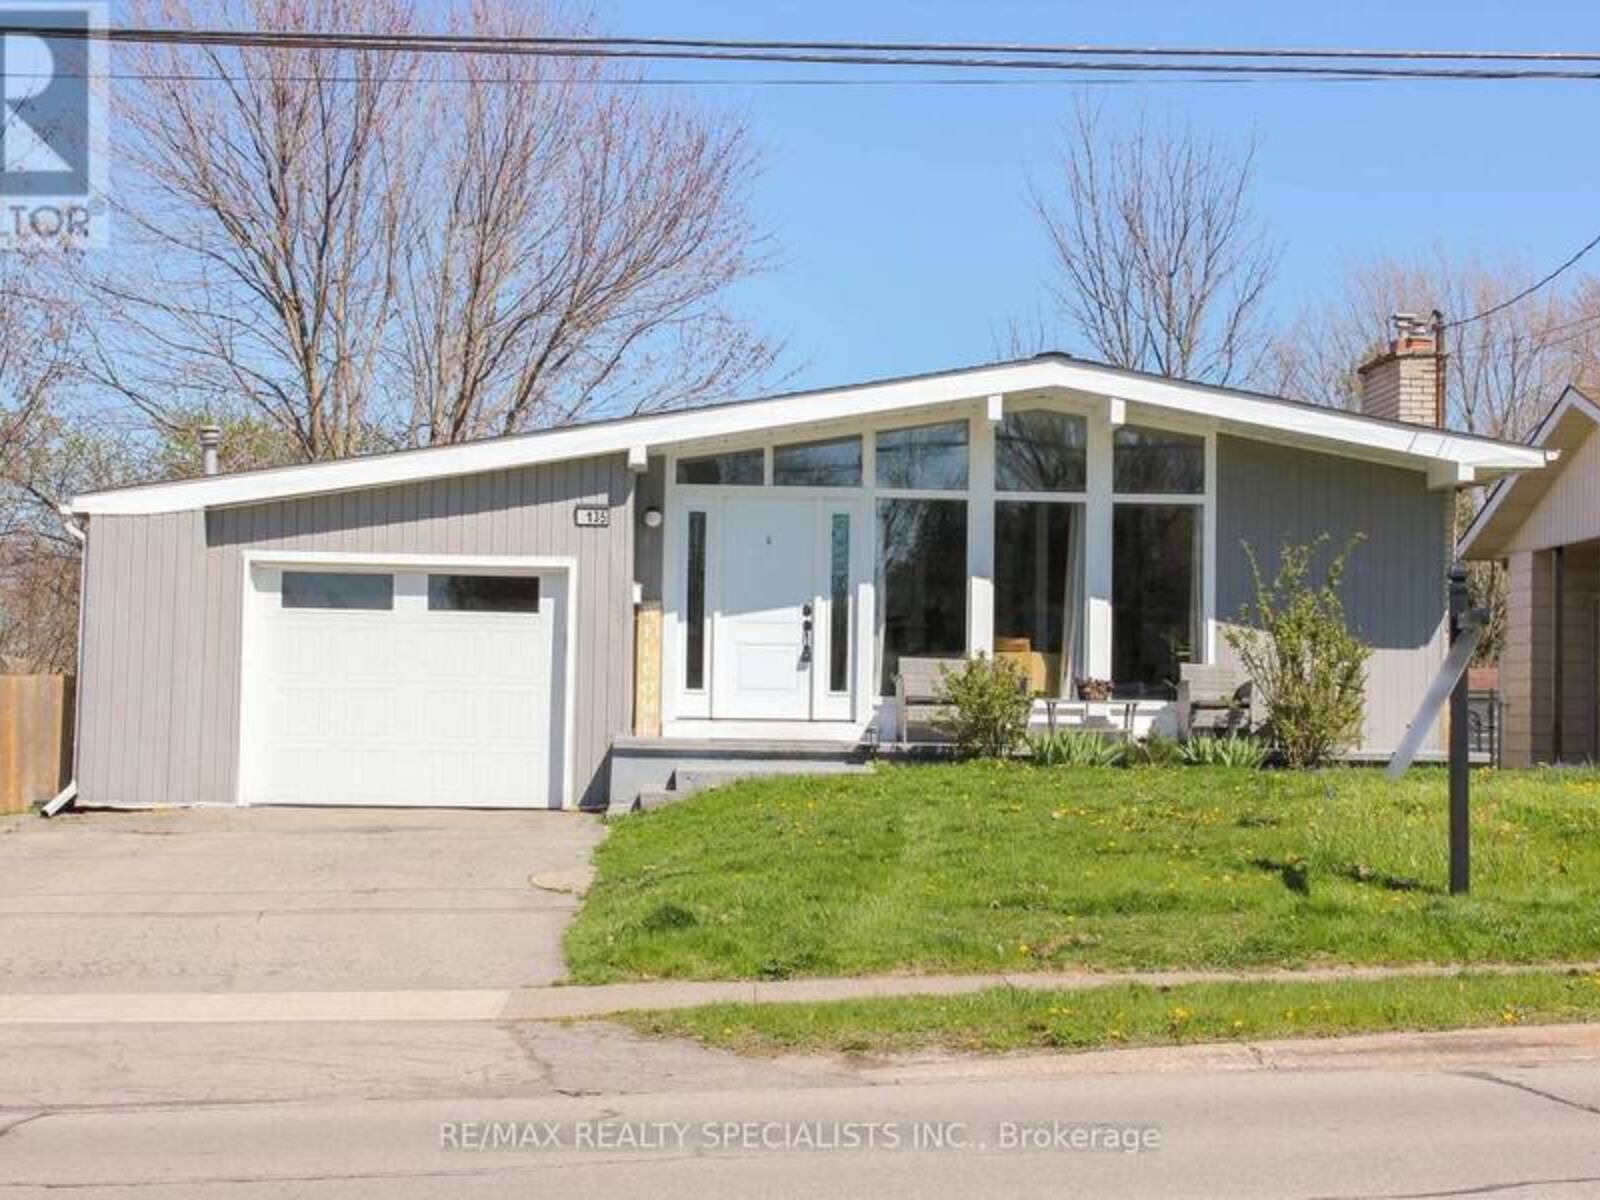 135 CONCESSION RD, Fort Erie, Ontario L2A 4G8